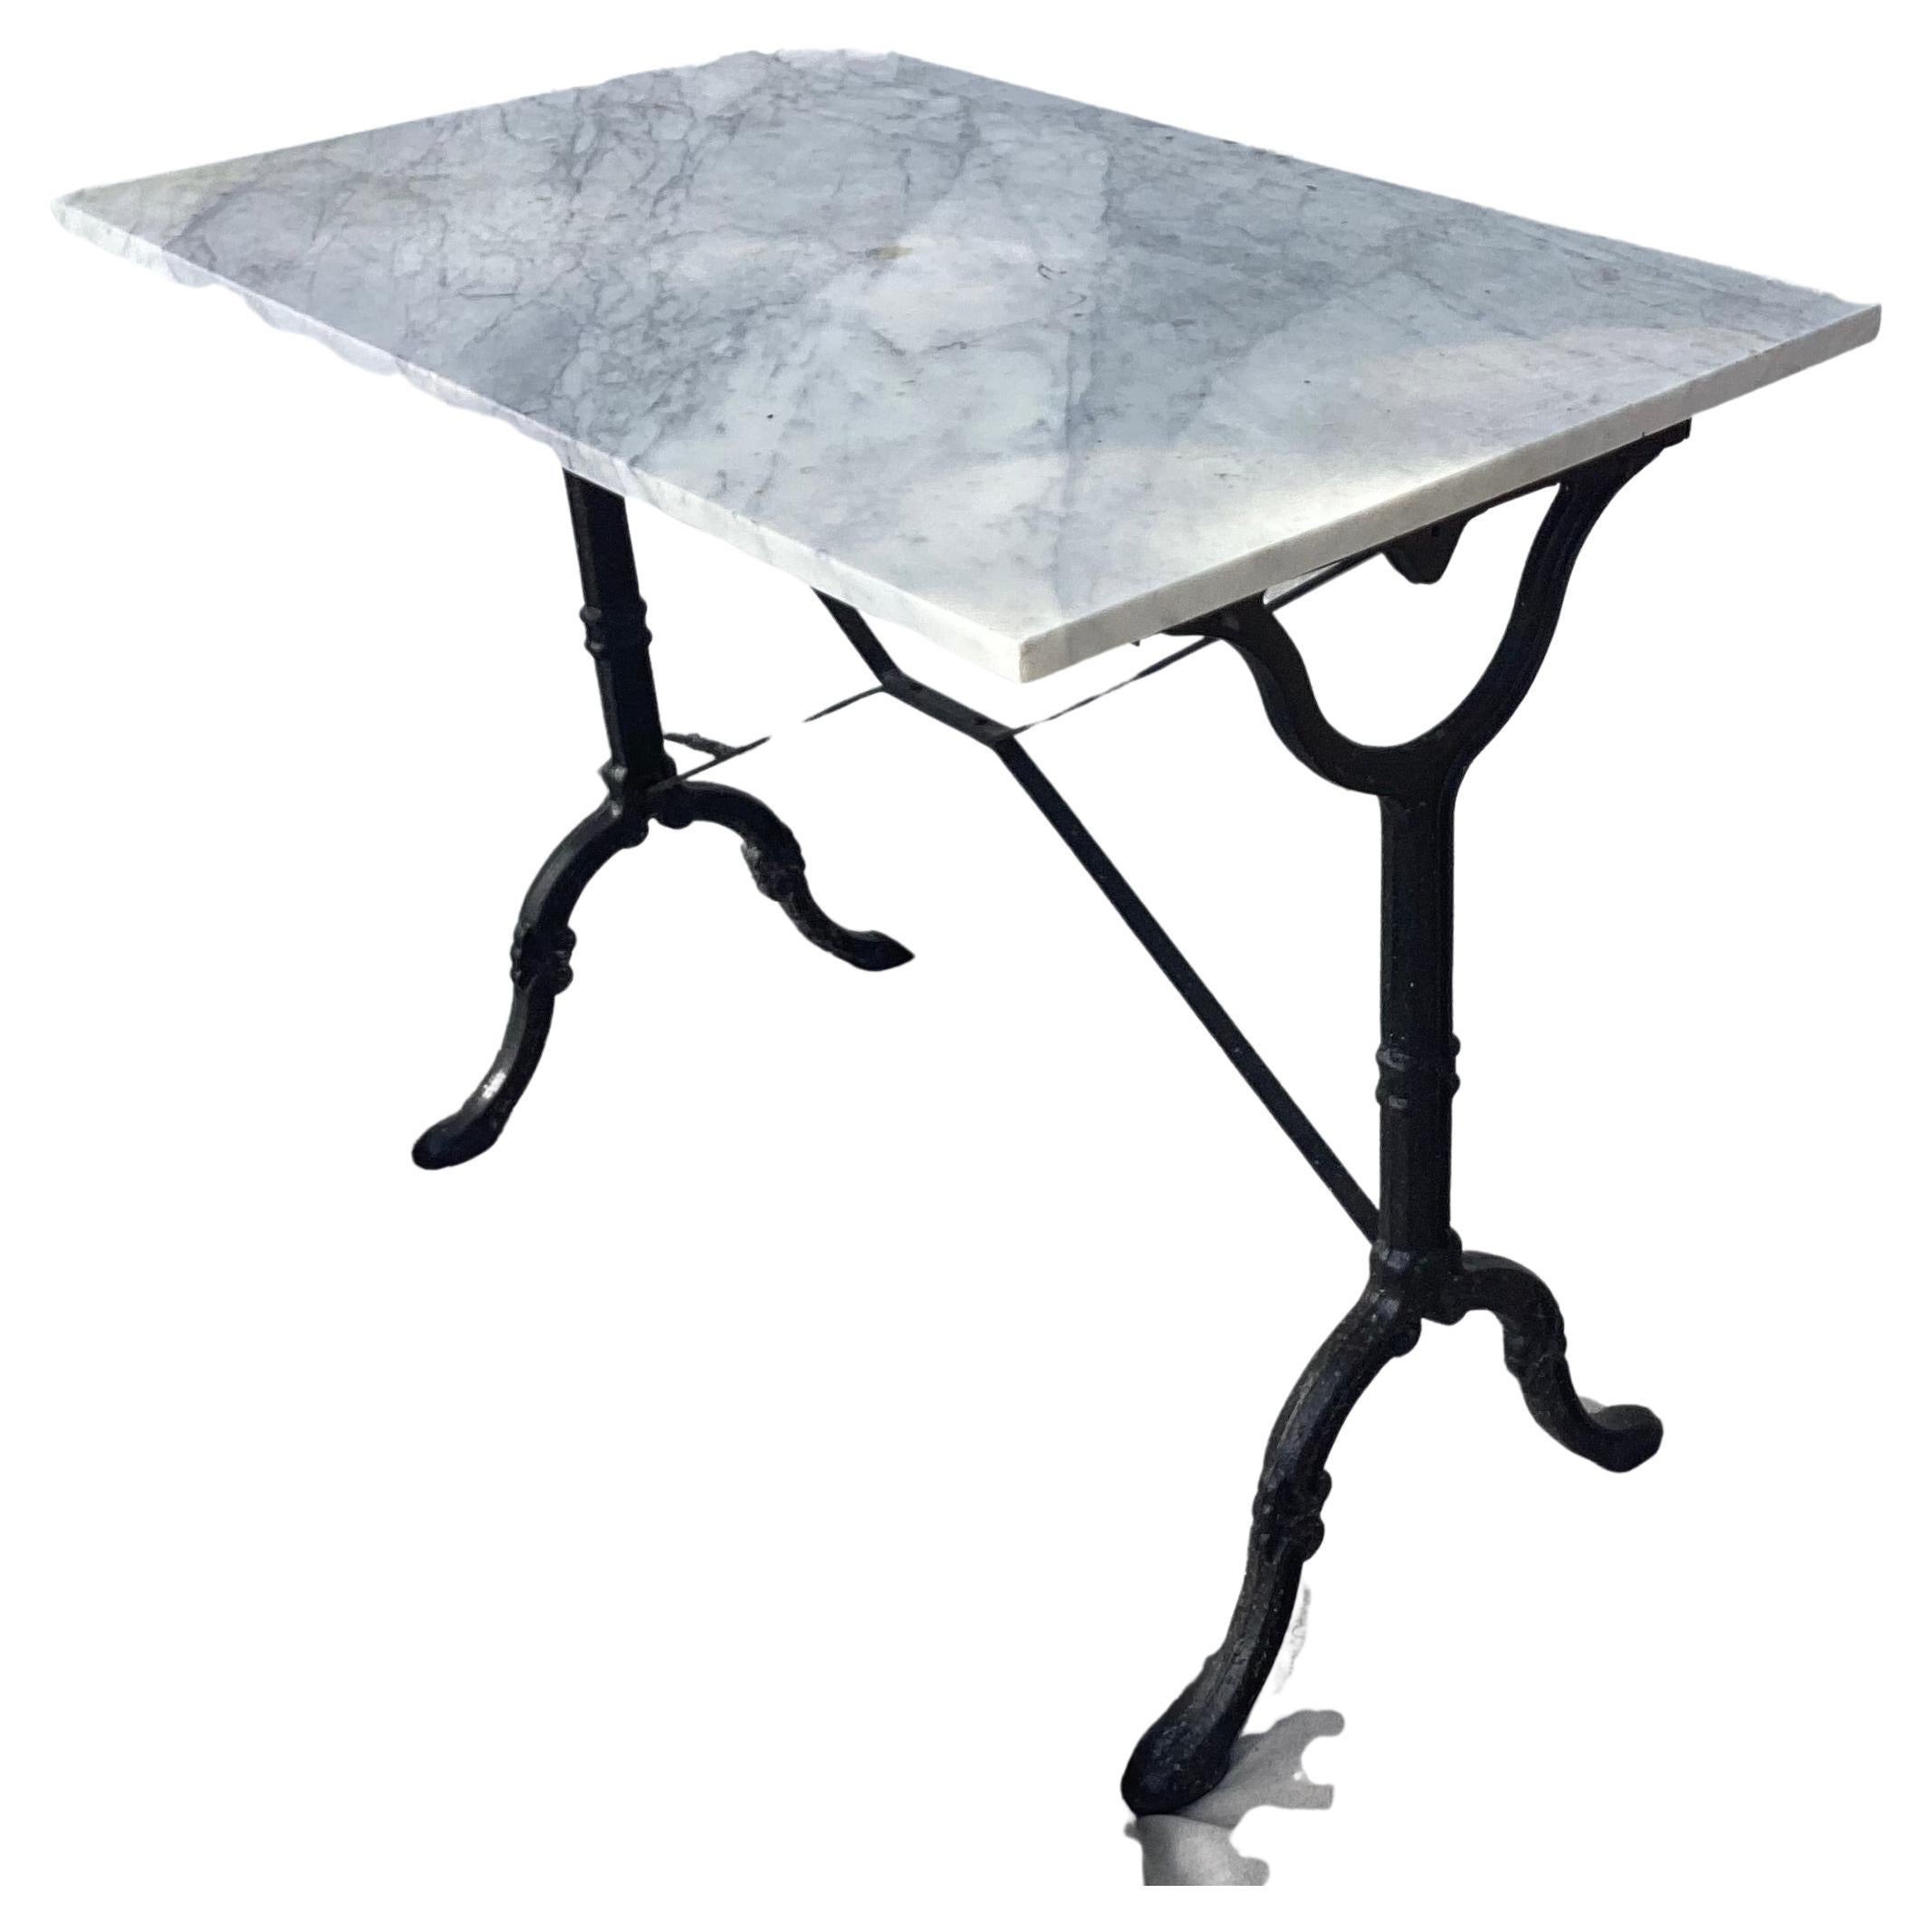 French cast iron marble top bistro table with beautiful black white and gray marble top. Nice patina. Perfect for indoor or outdoor use. Beautiful solid and sturdy.